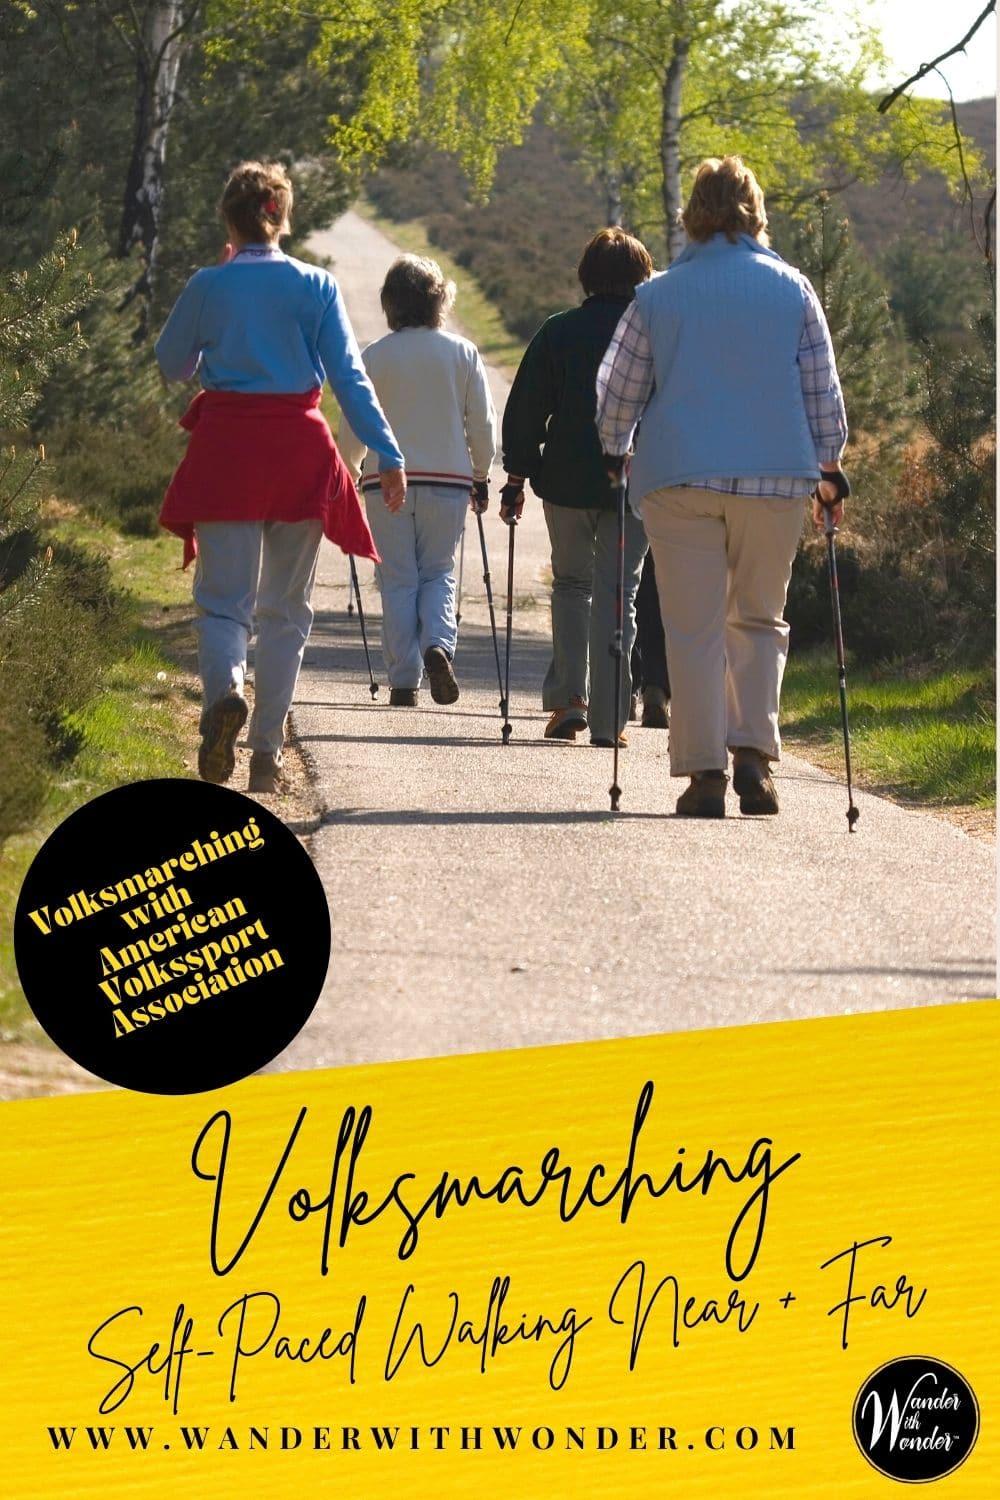 One of the best ways to explore your own neighborhood or travel across the United States and beyond is on foot. But where to start? Let the non-profit American Volkssport Association or AVA: America’s Walking Club introduce you to volksmarching, or self-paced walking.